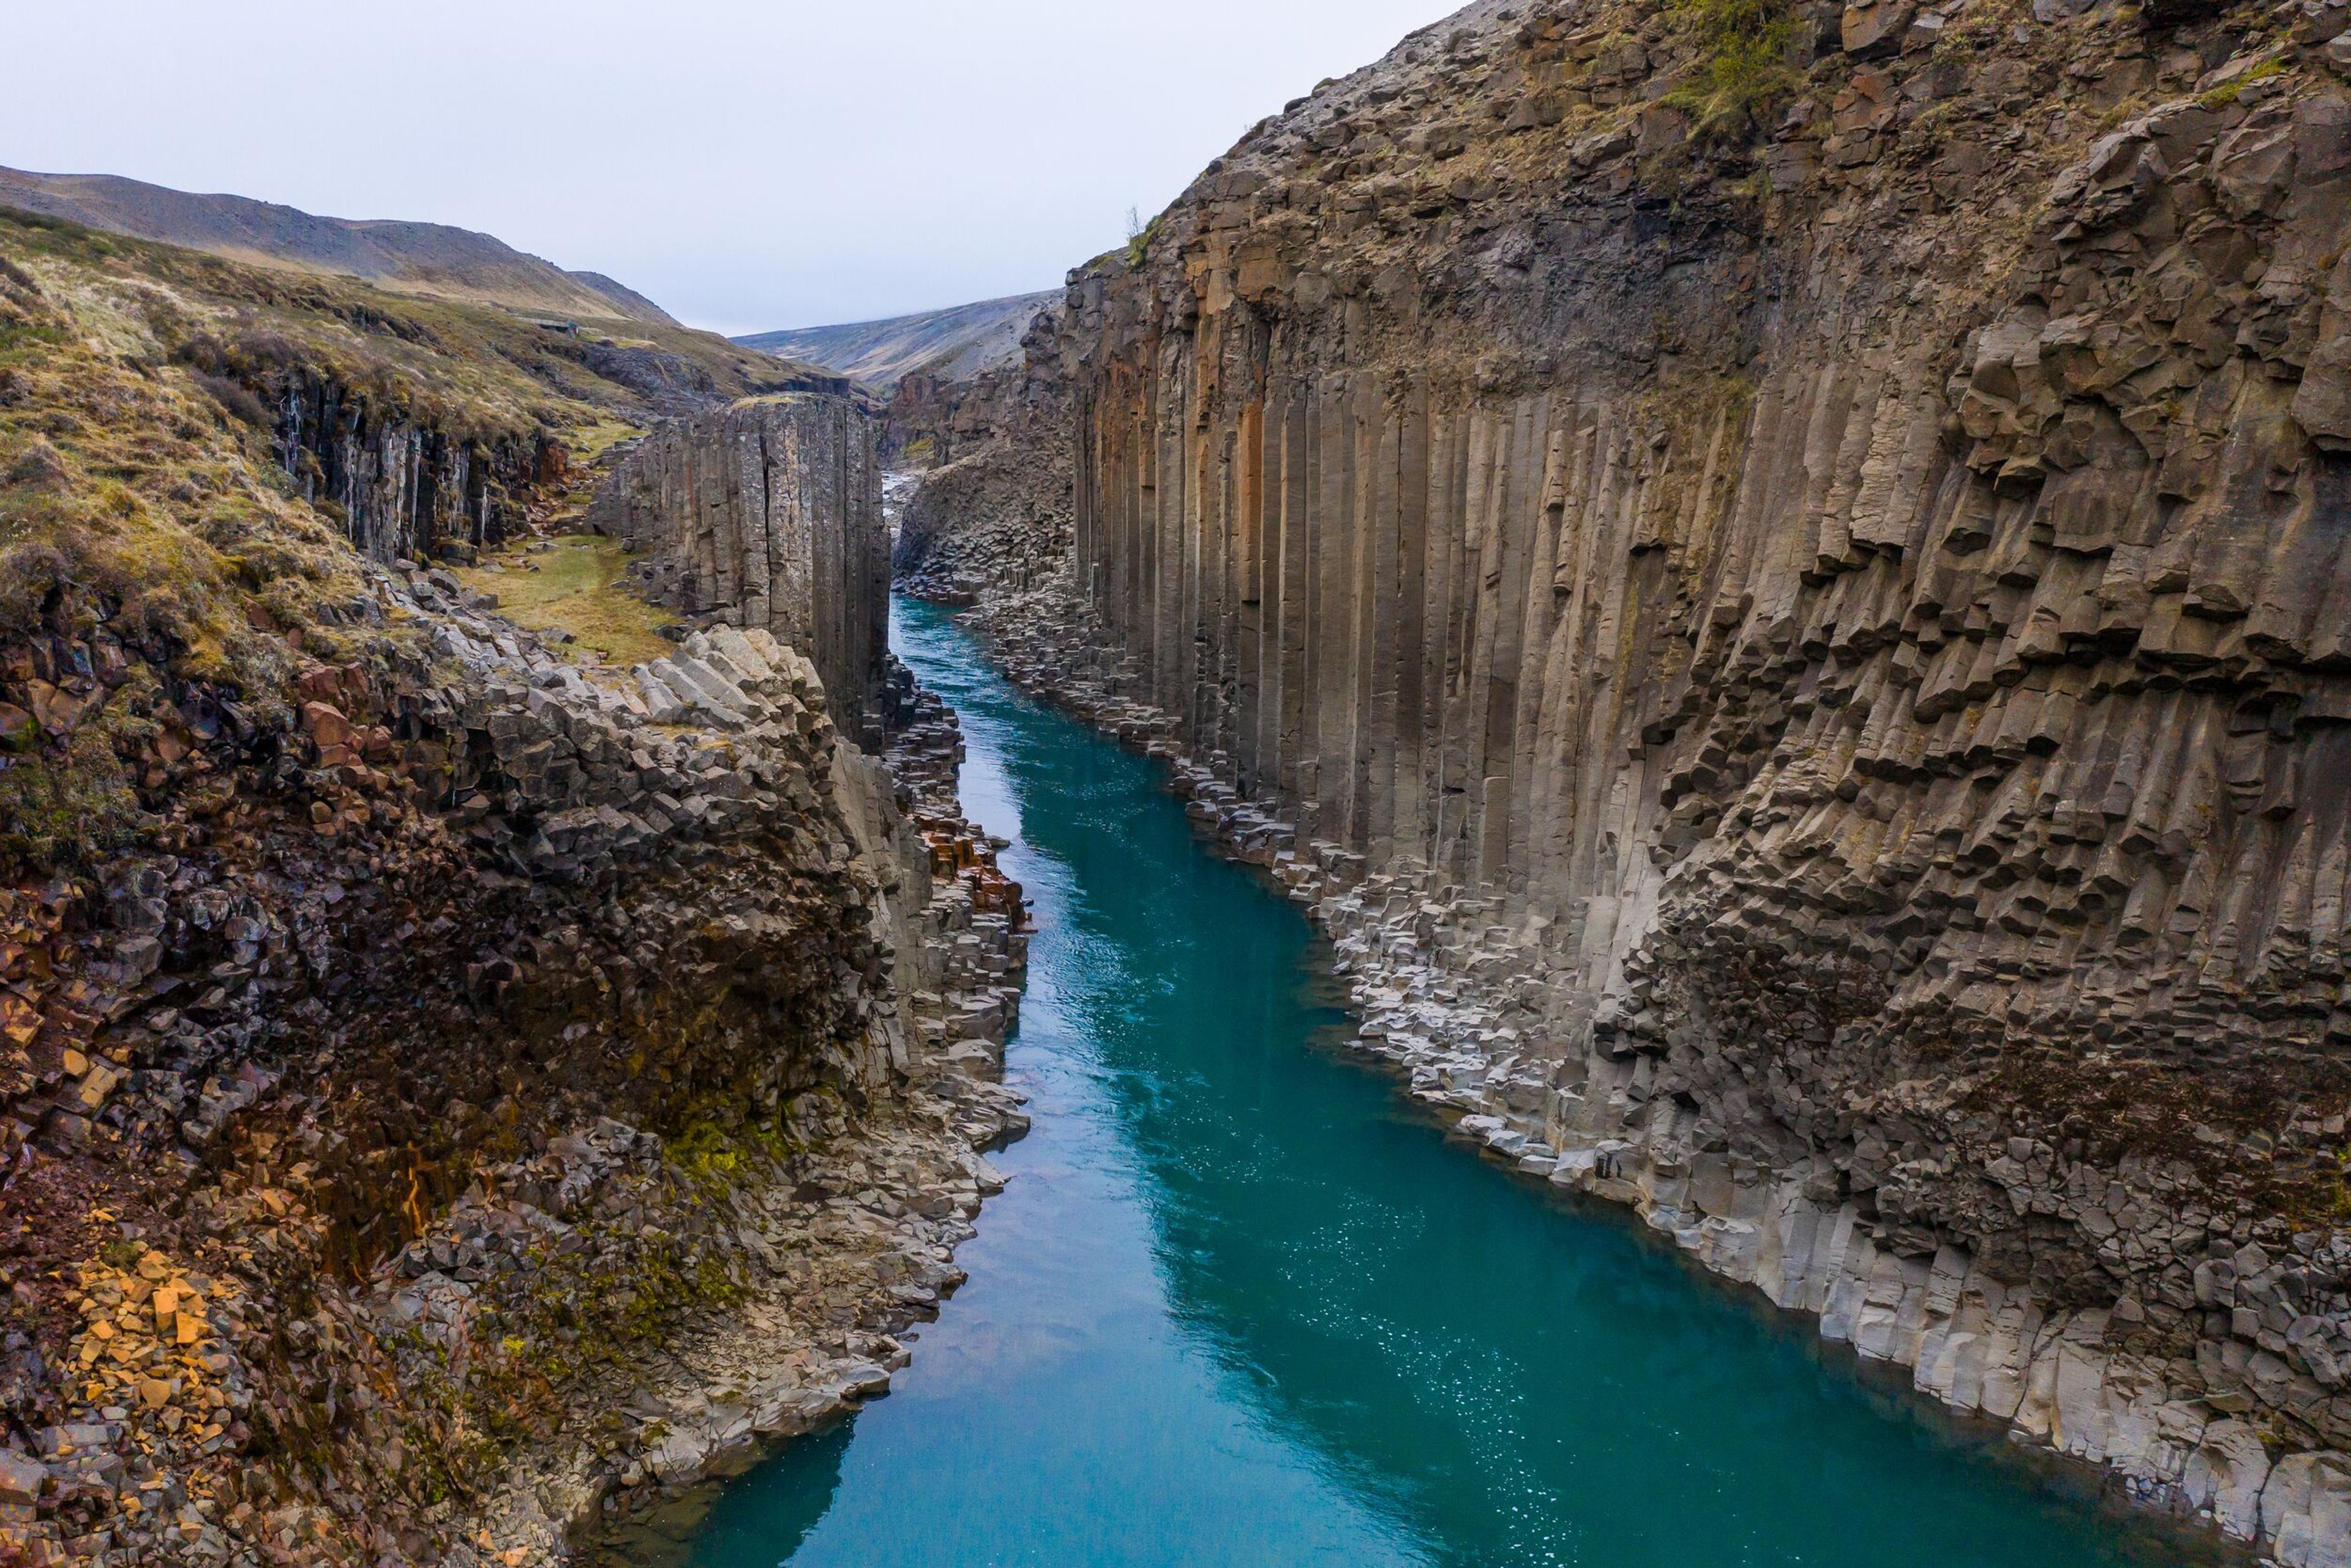 Aerial view of Stuðlagil Canyon in Iceland, showcasing a narrow river flowing between tall cliffs characterized by geometric basalt columns, with contrasting autumnal colors on the canyon's edges."